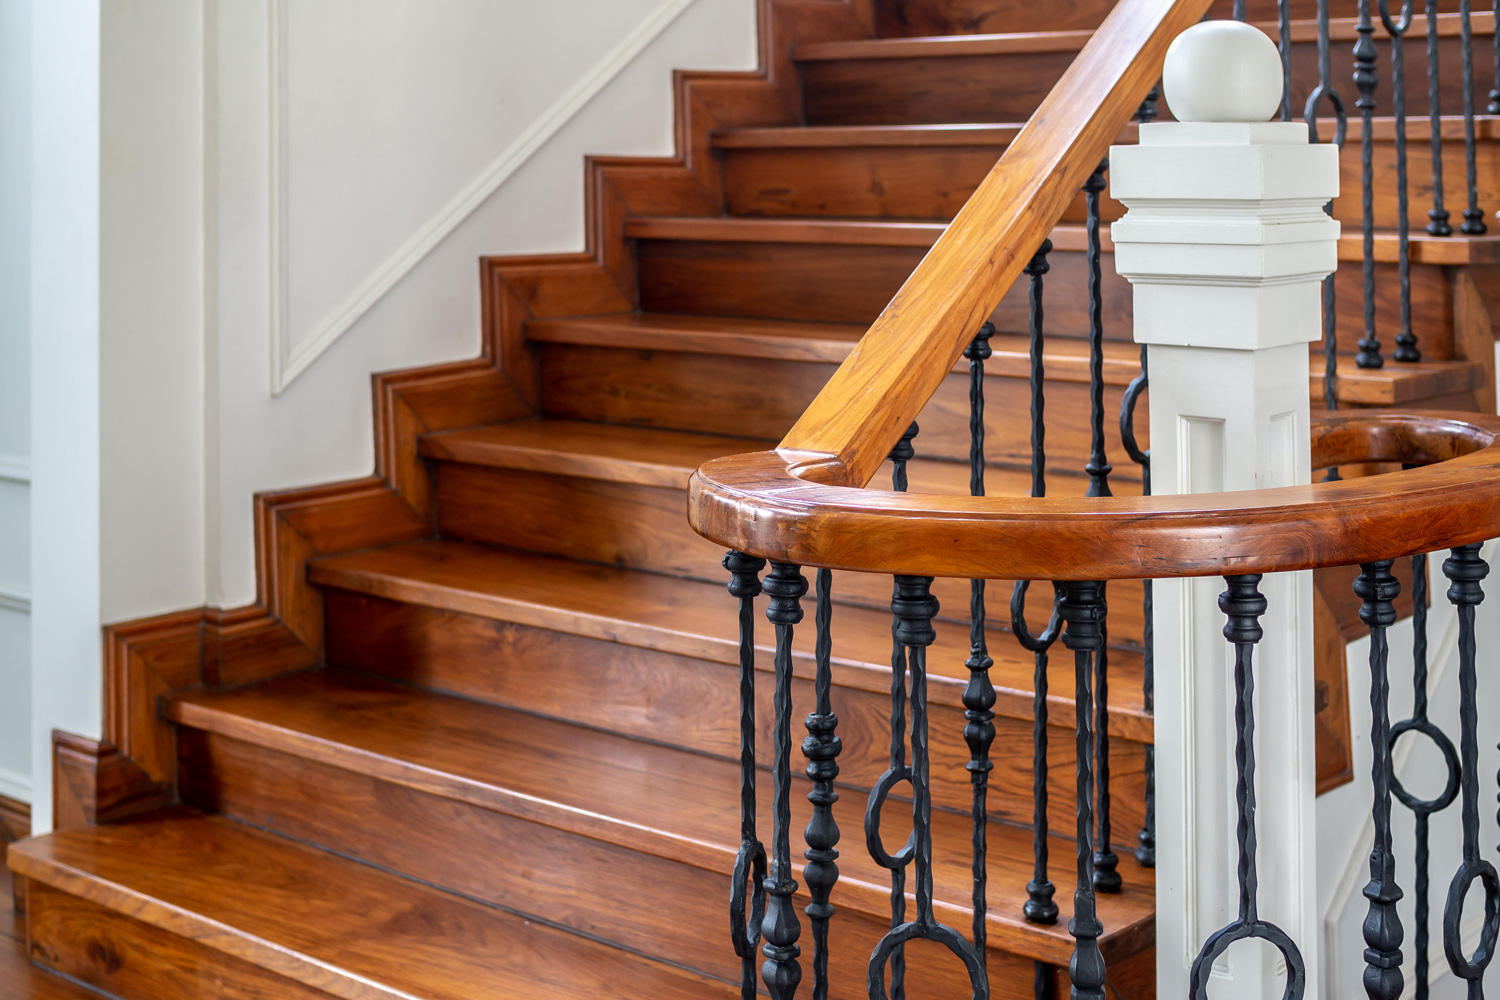 Classic vintage elegant wooden staircase with wrought iron railing.